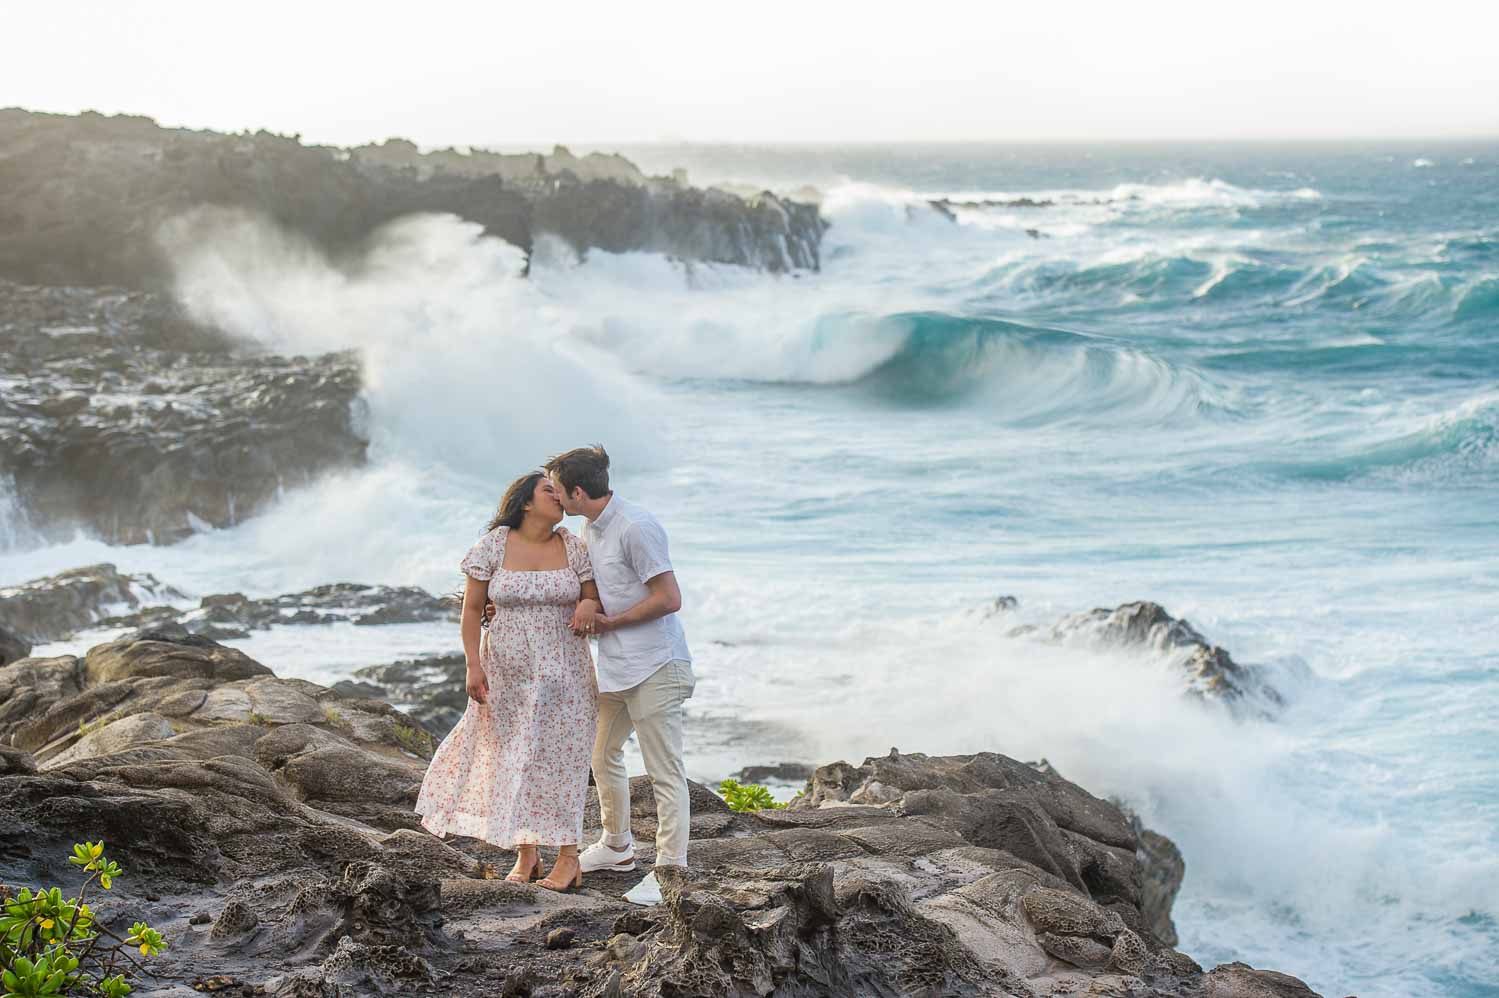 Total surprise photographer in maui hawaii<br />
